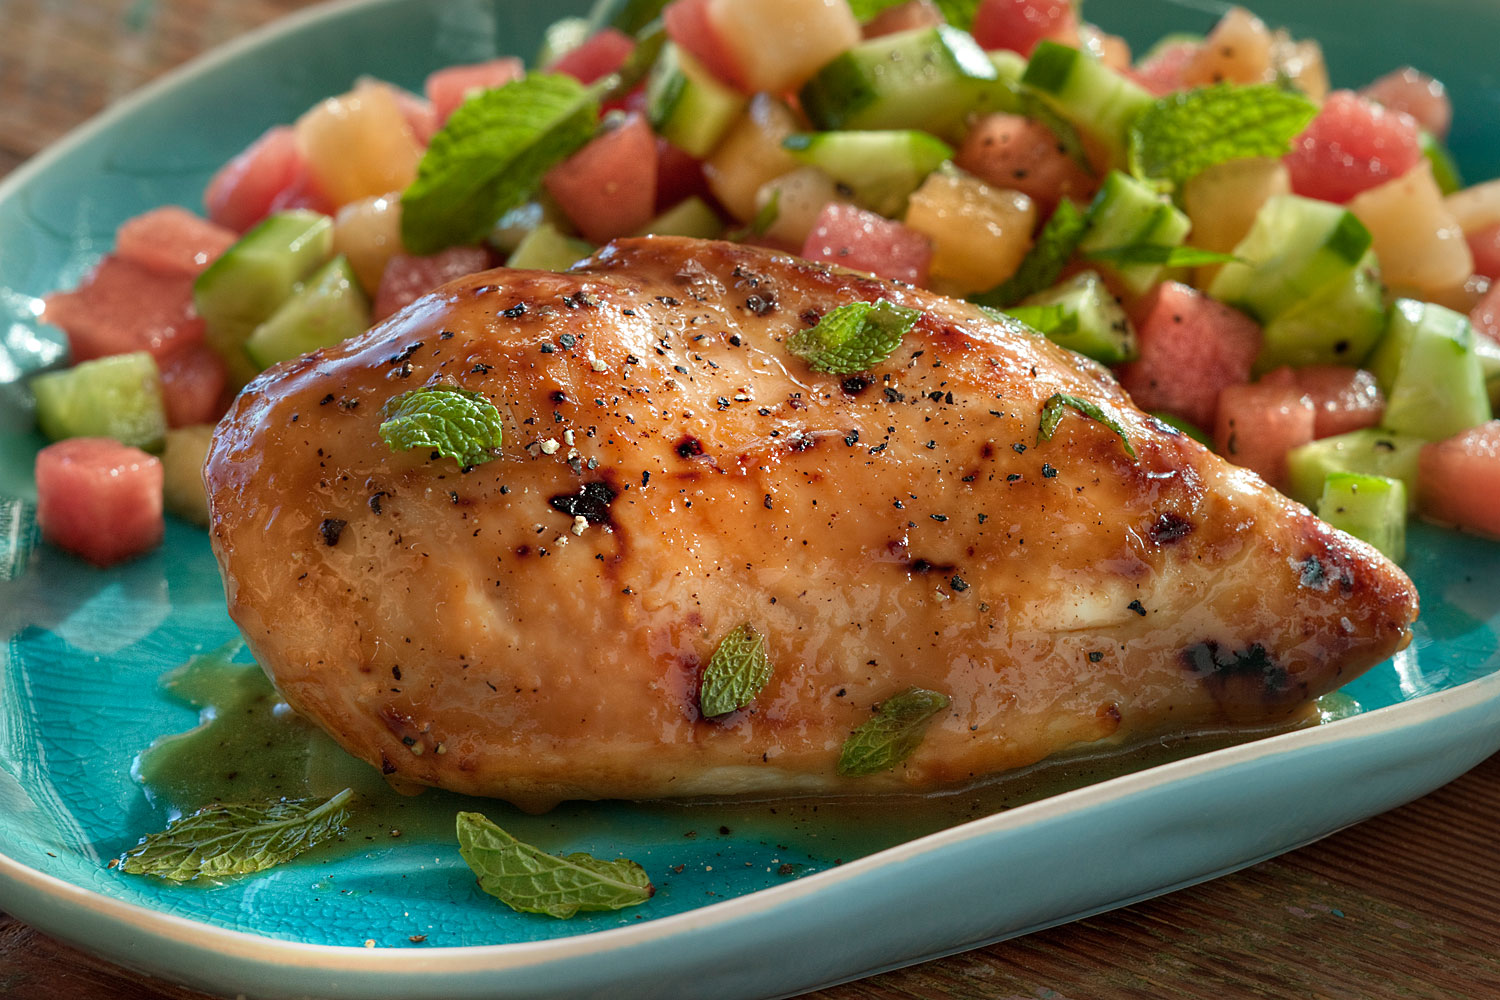 Miso-Glazed Chicken with Minted Melon Relish